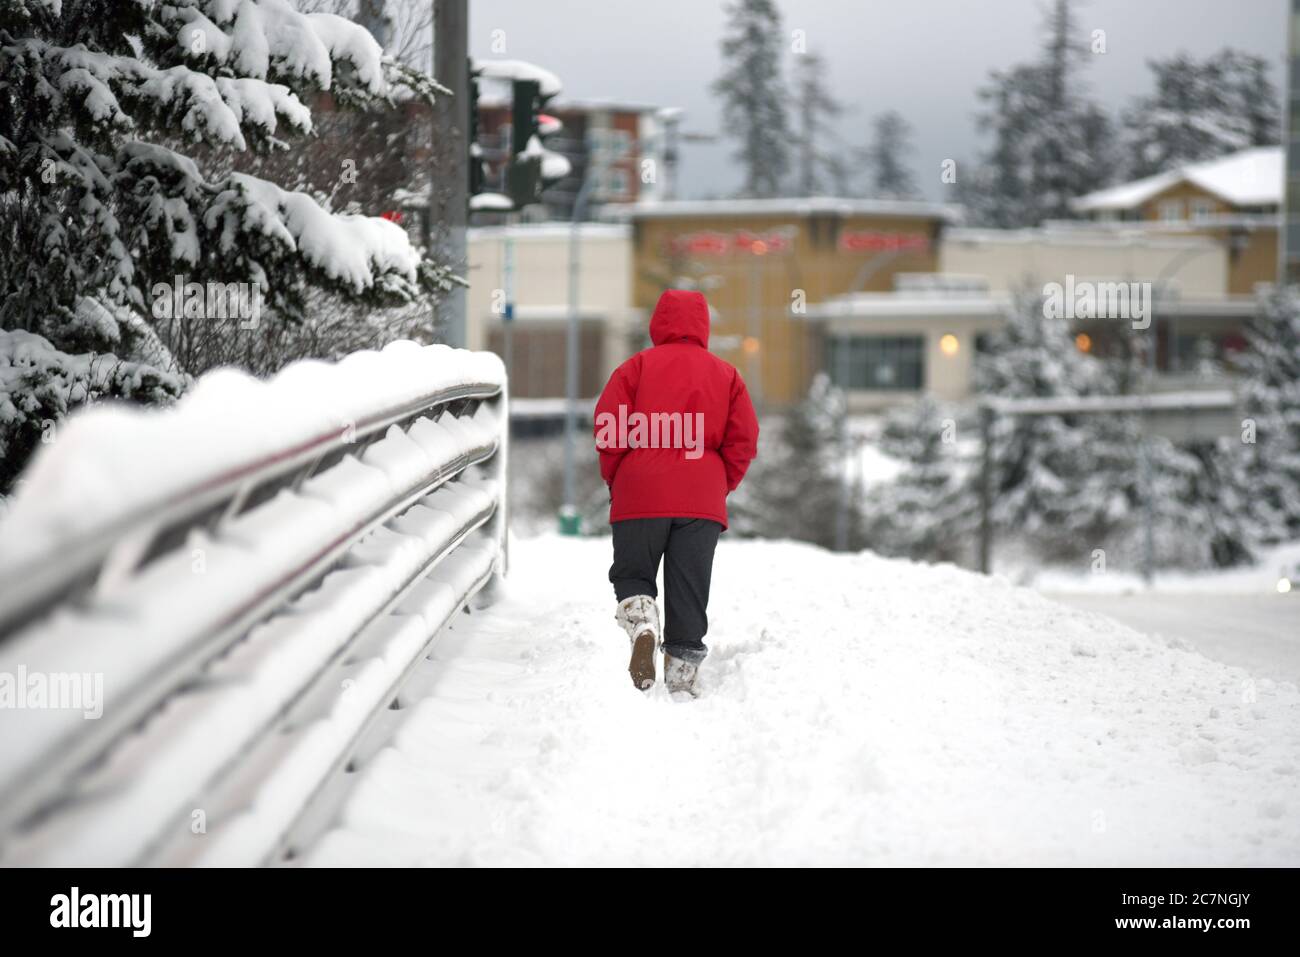 A pedestrian in a red coat makes her way through snow on a sidewalk during a rare west coast snow storm in the greater Victoria suburb of View Royal, Stock Photo